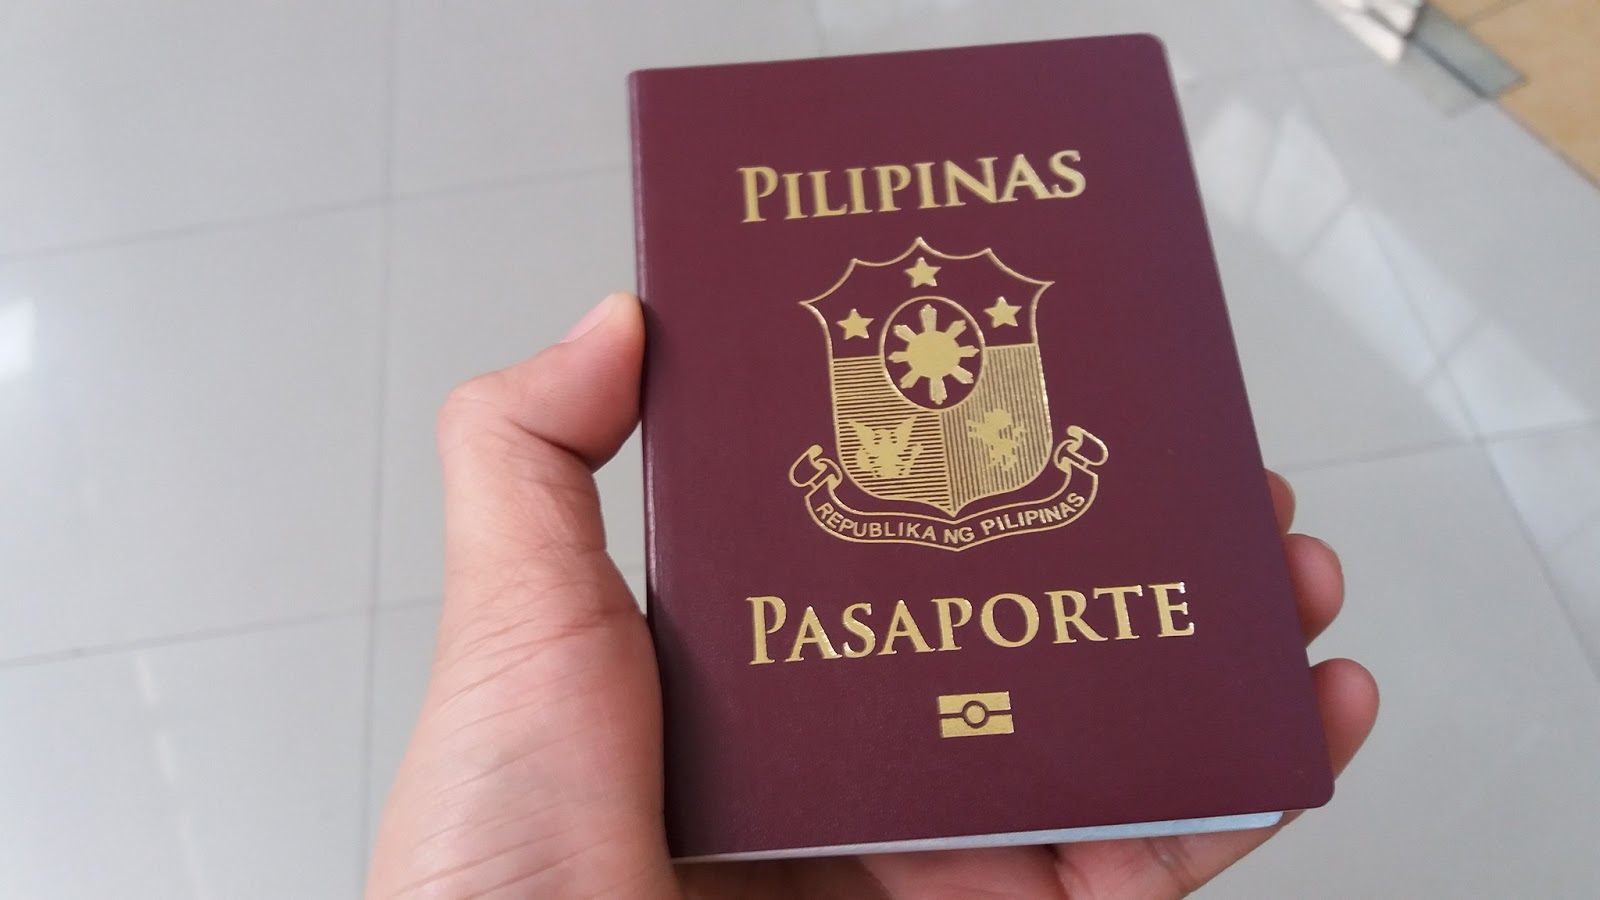 Vietnam Reissue E-visa For Philippine After March 15, 2022 | Vietnam Entry Requirements For Philippine 2022